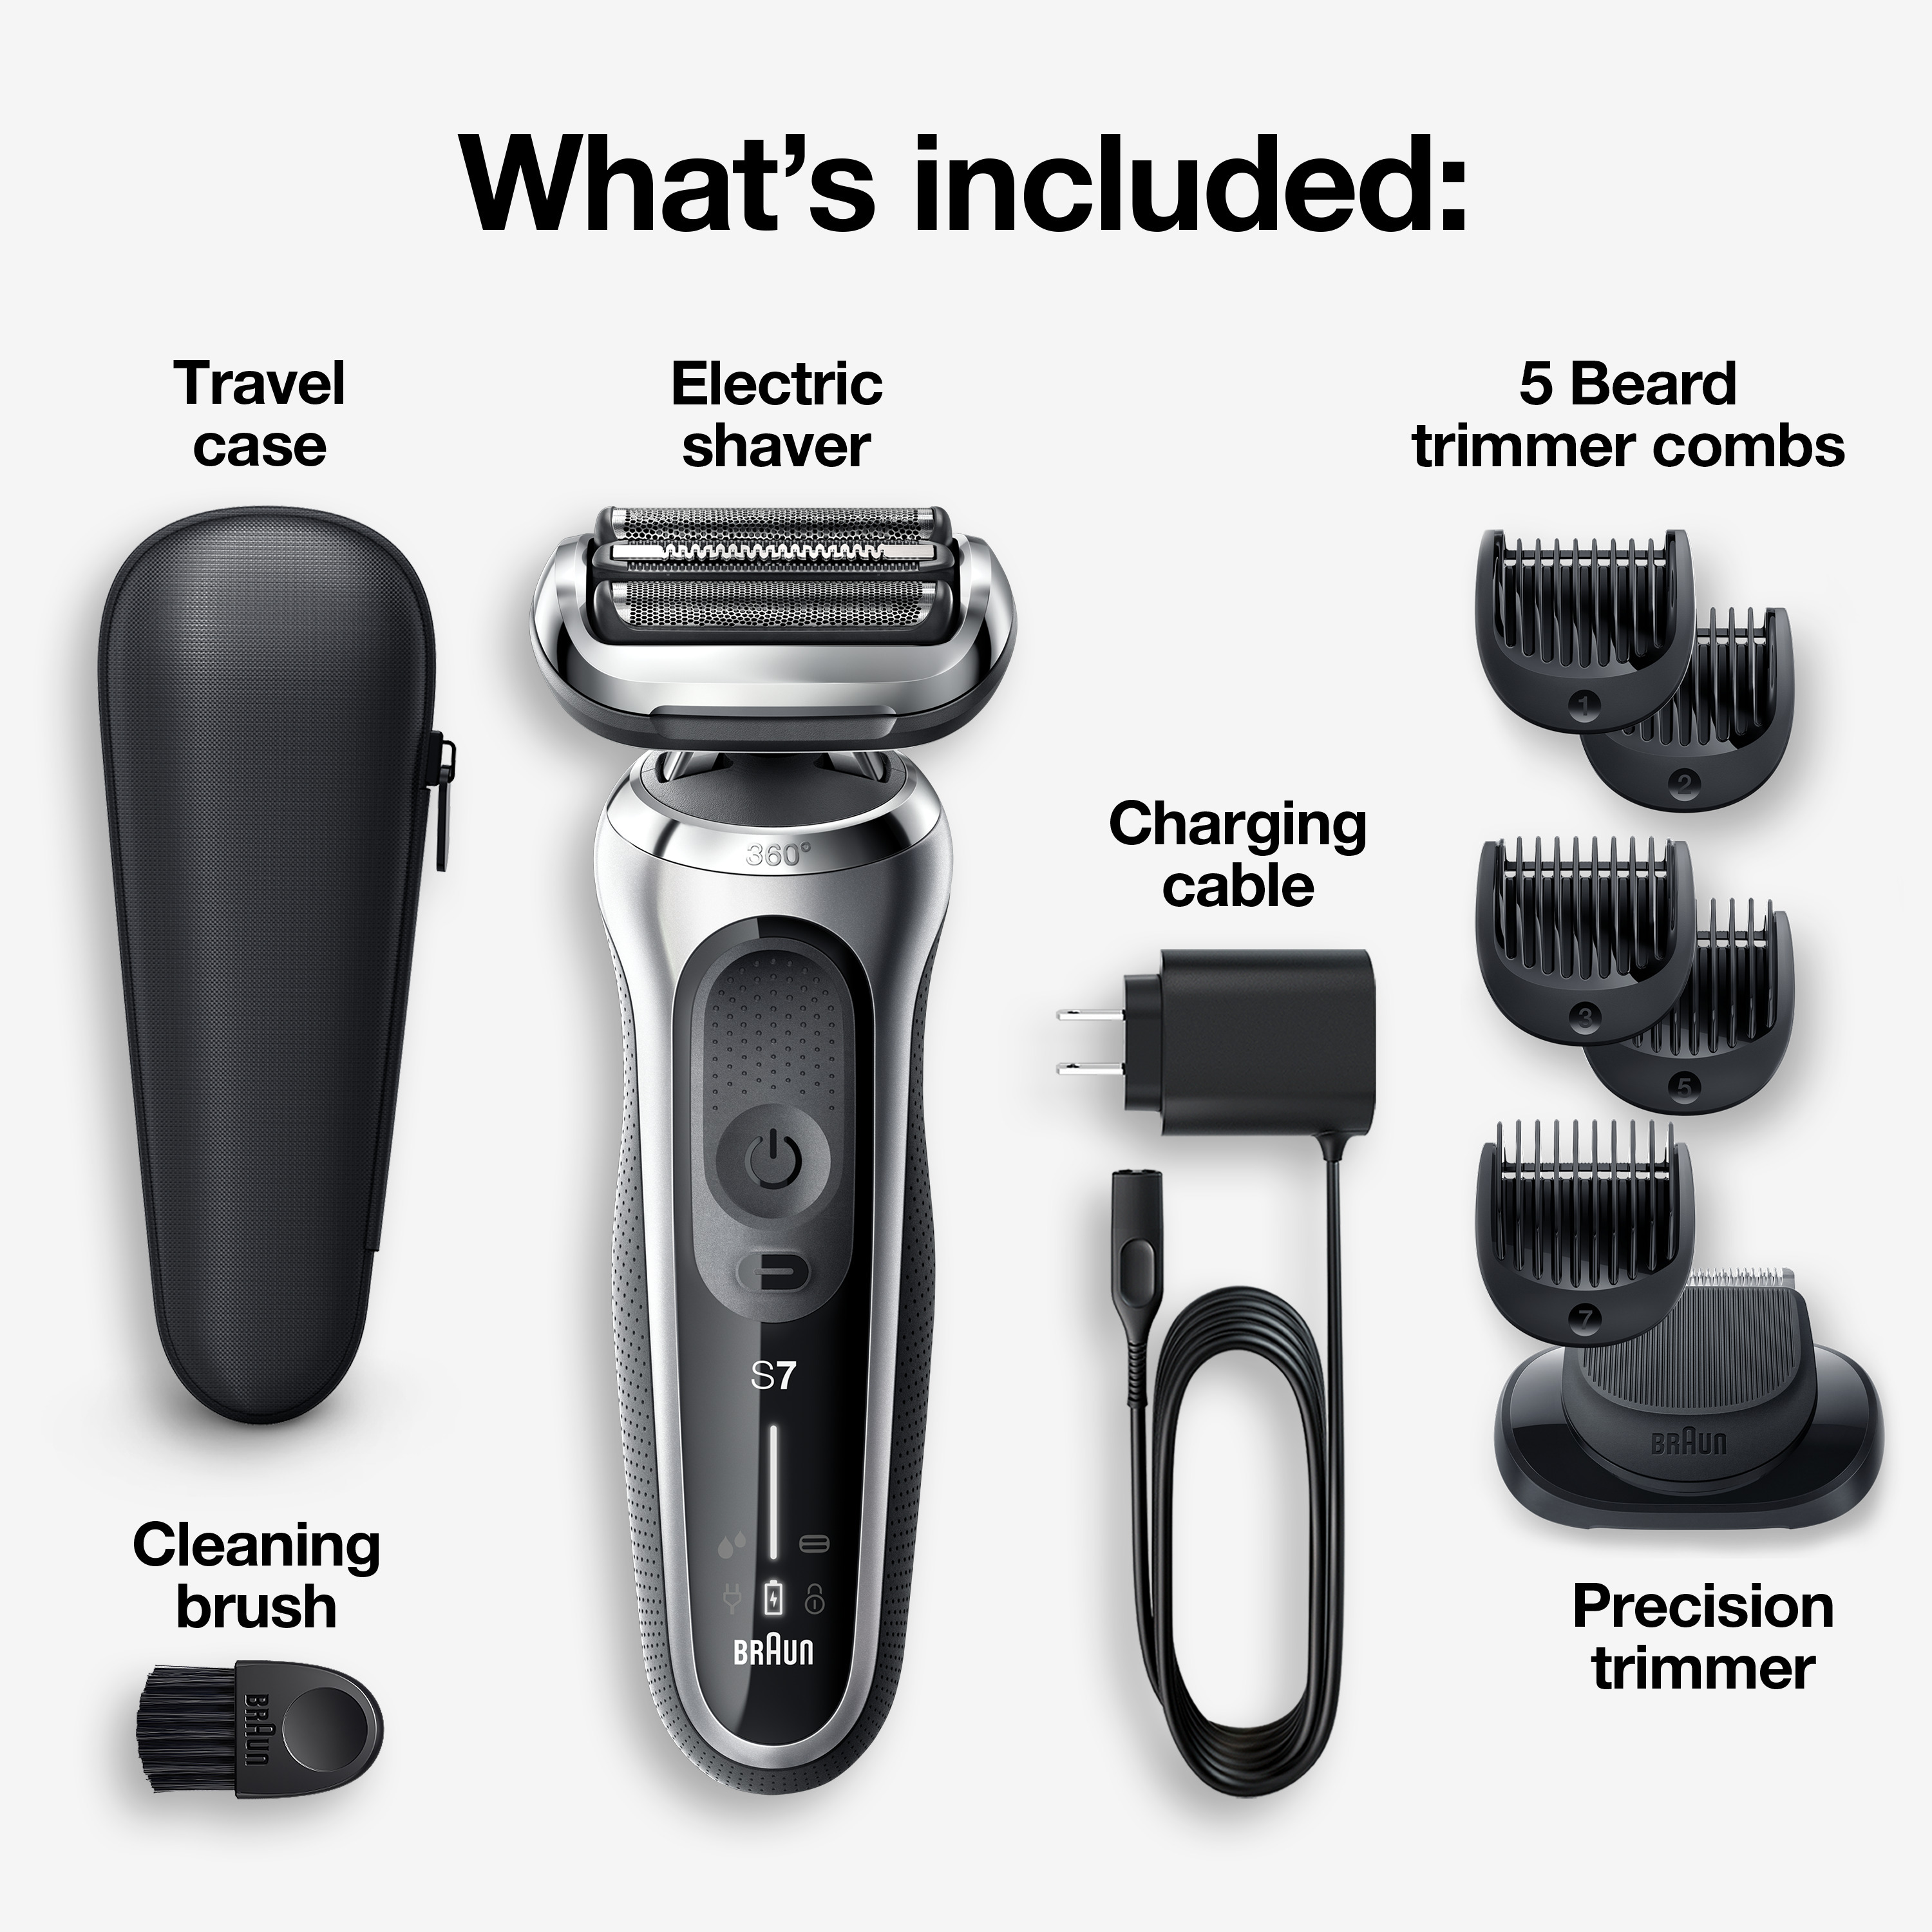 Braun Series 7 7025s Flex Rechargeable Wet Dry Men's Electric Shaver with Beard Trimmer - image 3 of 12